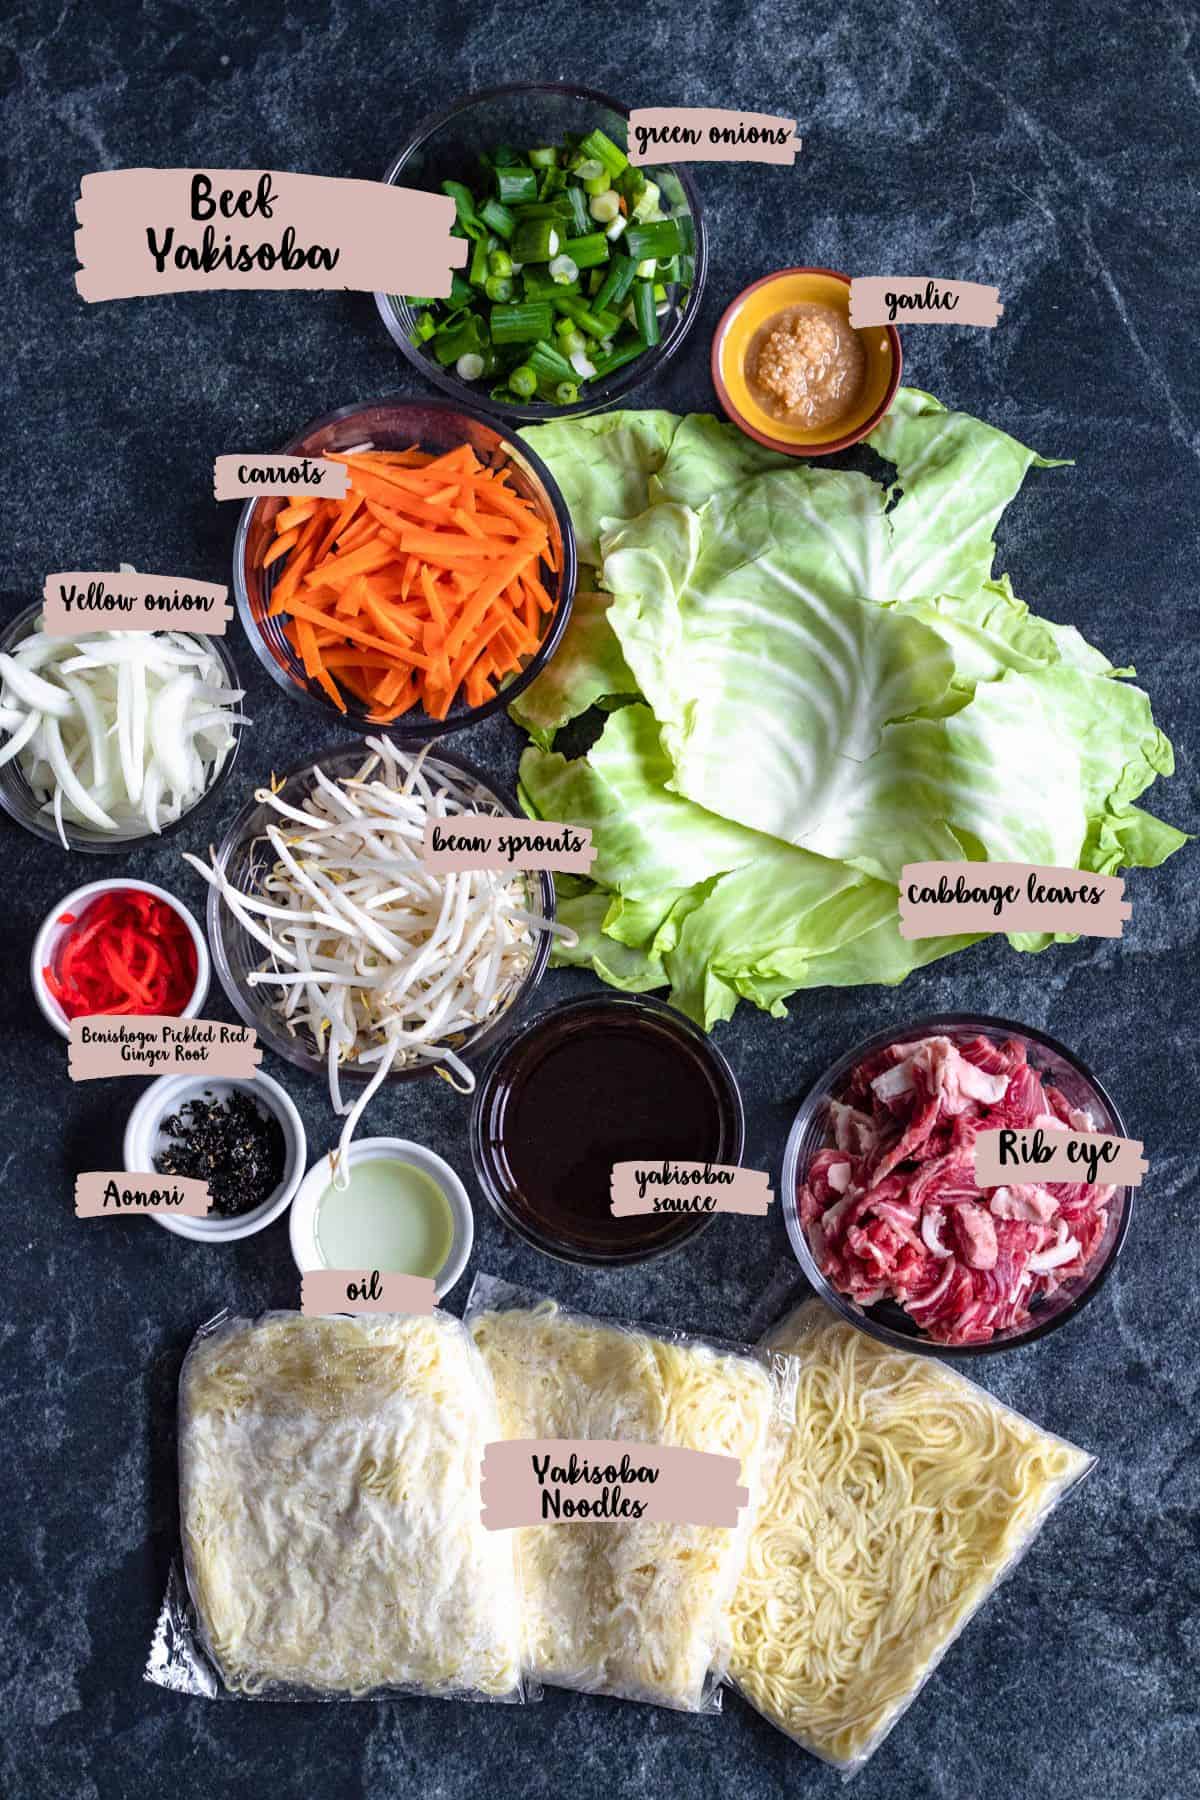 Ingredients shown are used to prepare Beef yakisoba recipe. 